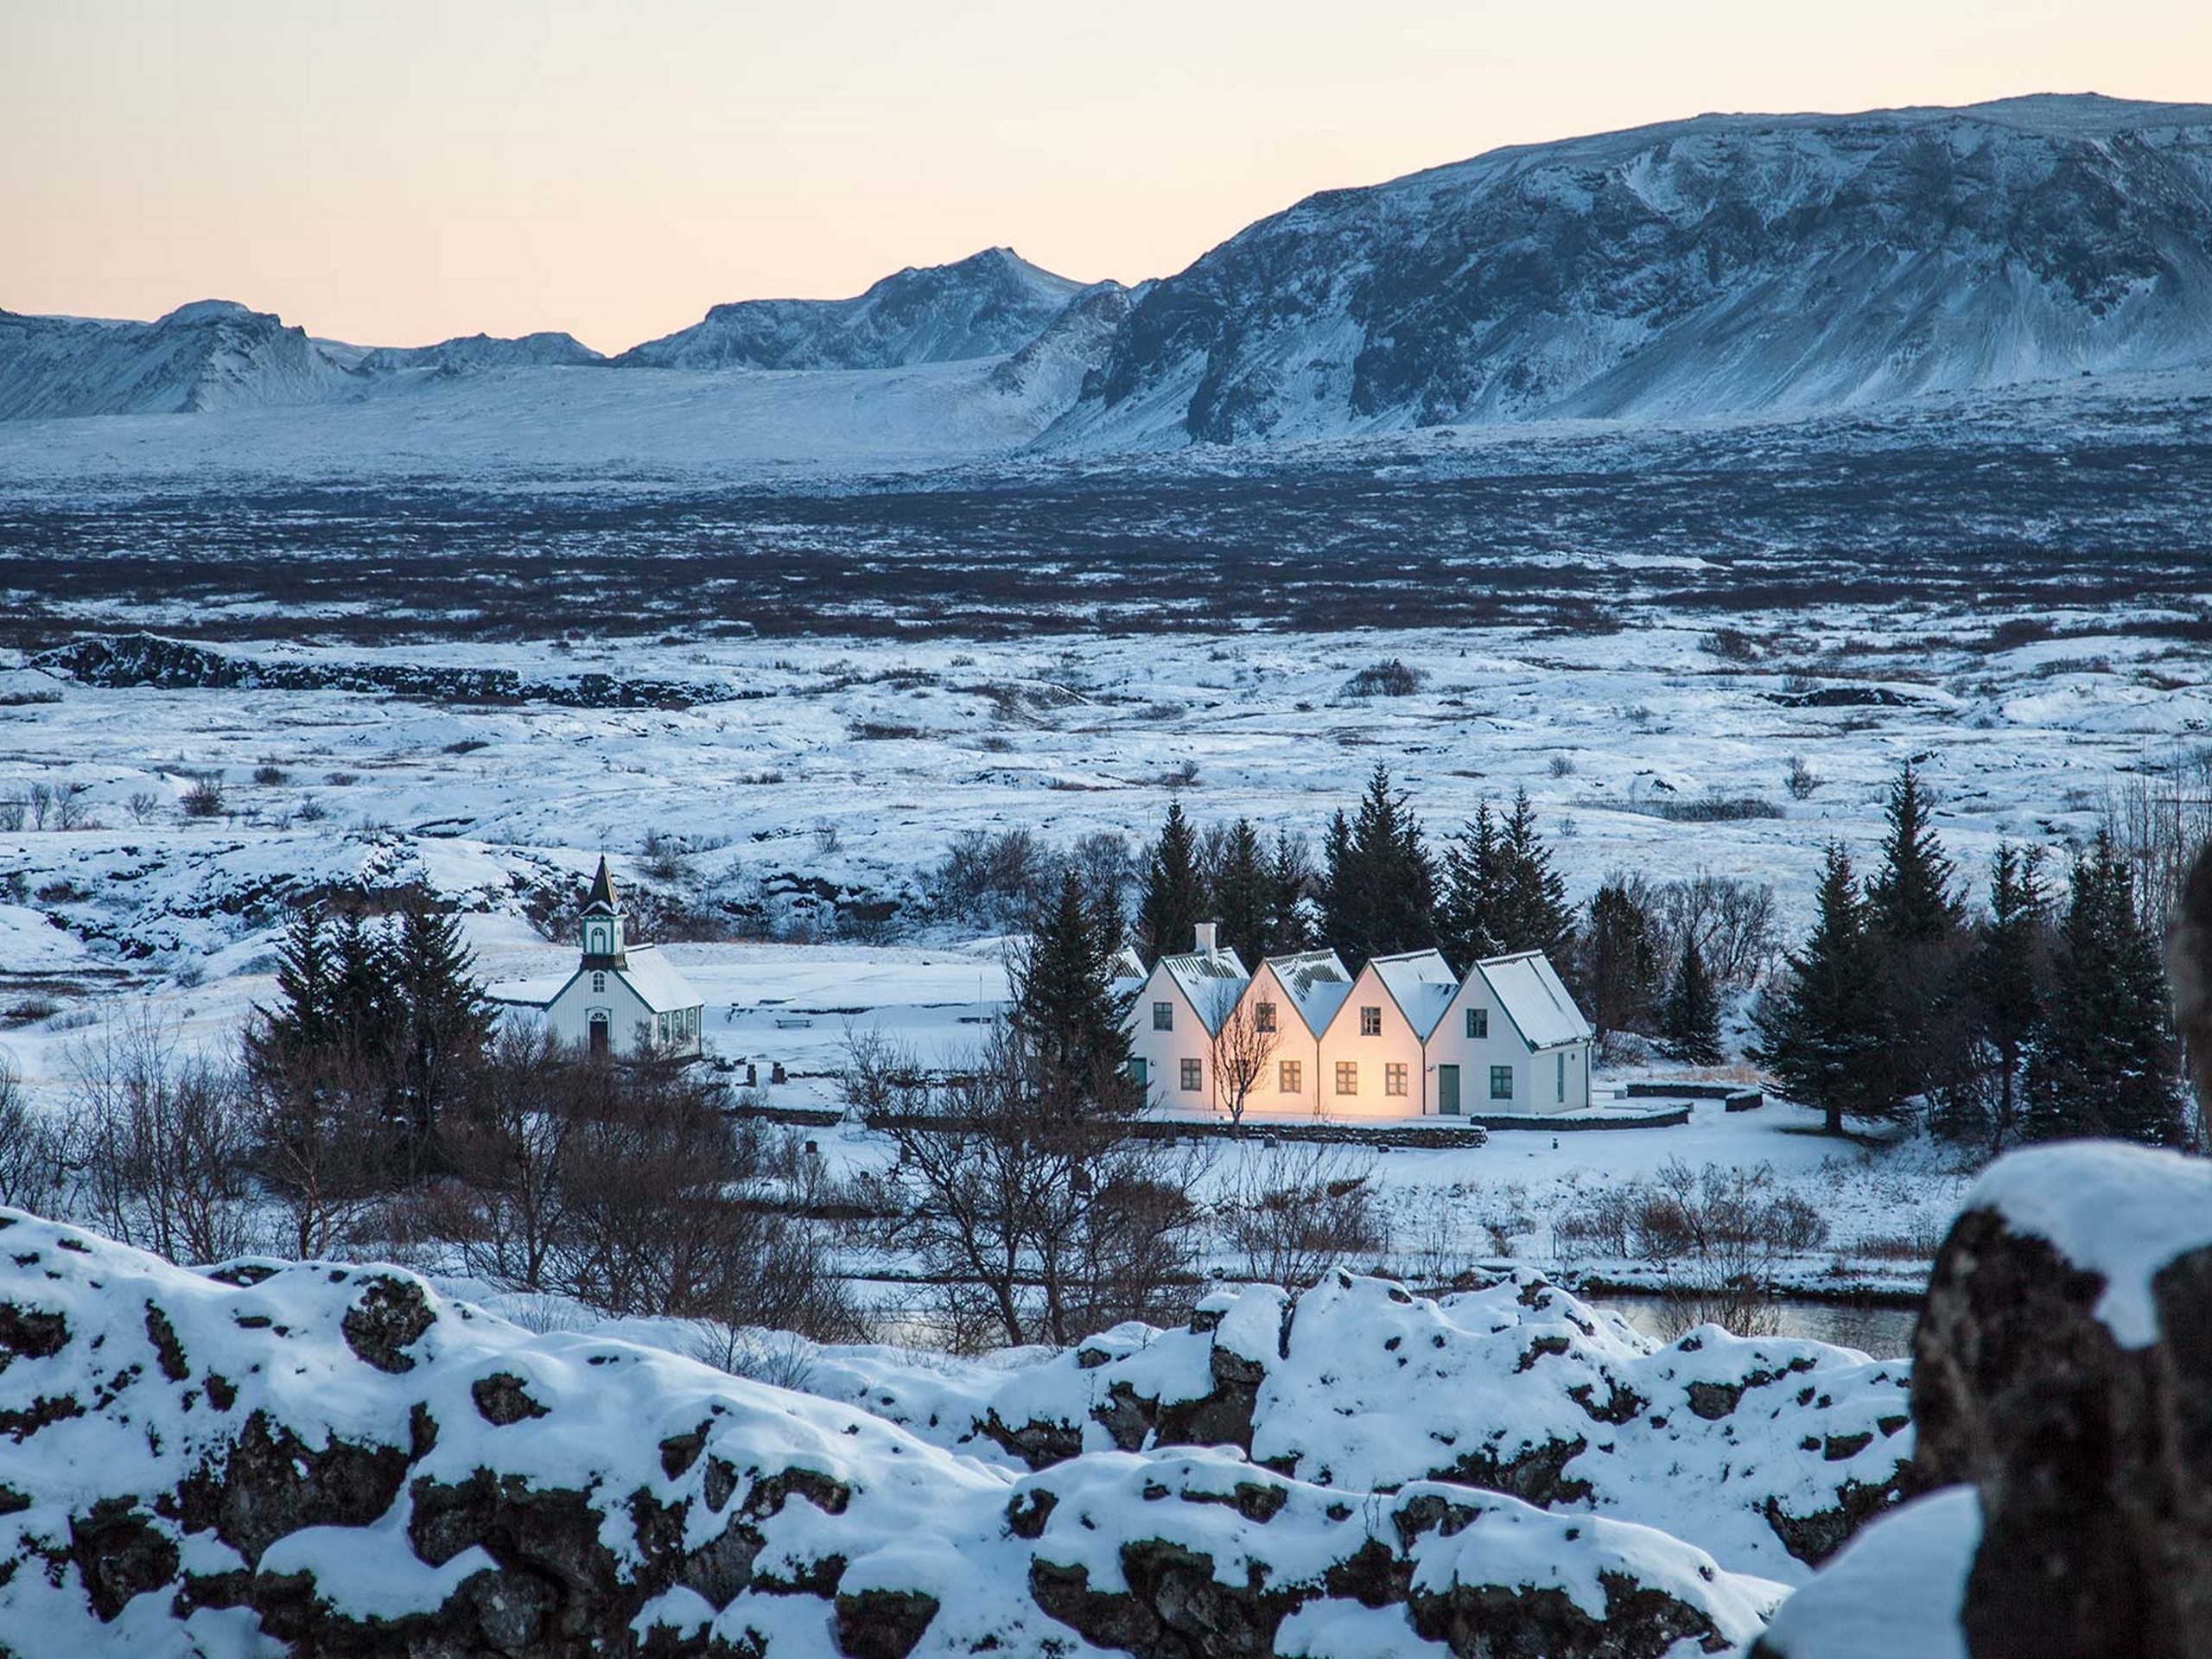 Countryside of the South Iceland - Photo by Bjorgvin Hilmarsson